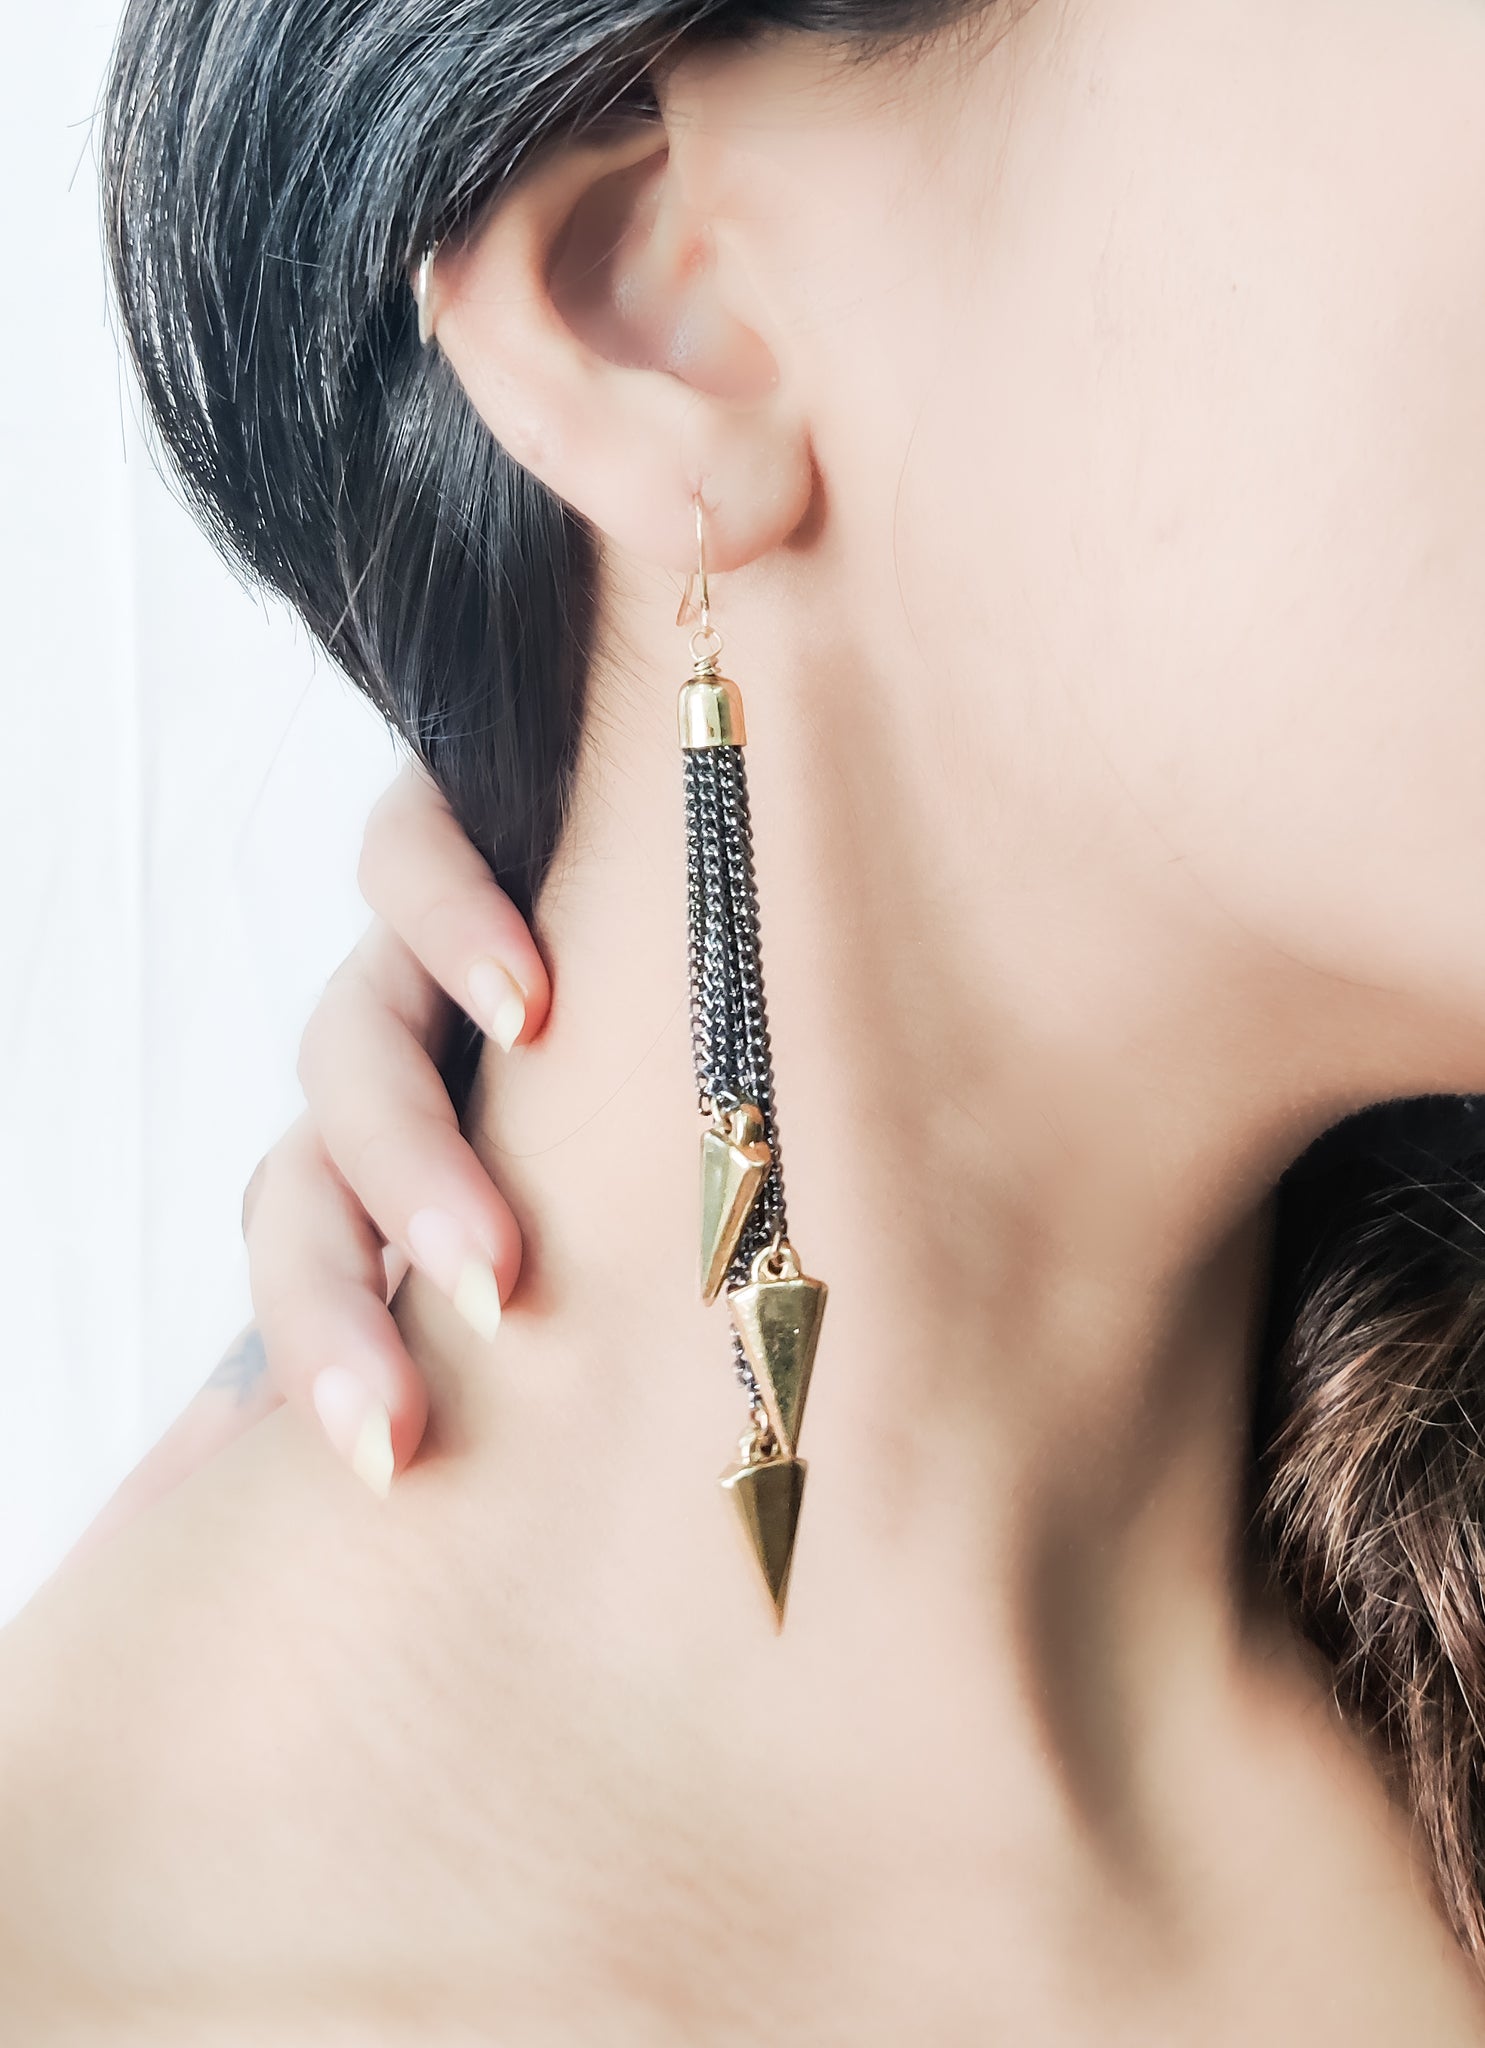 Black and golden edgy handcrafted earrings